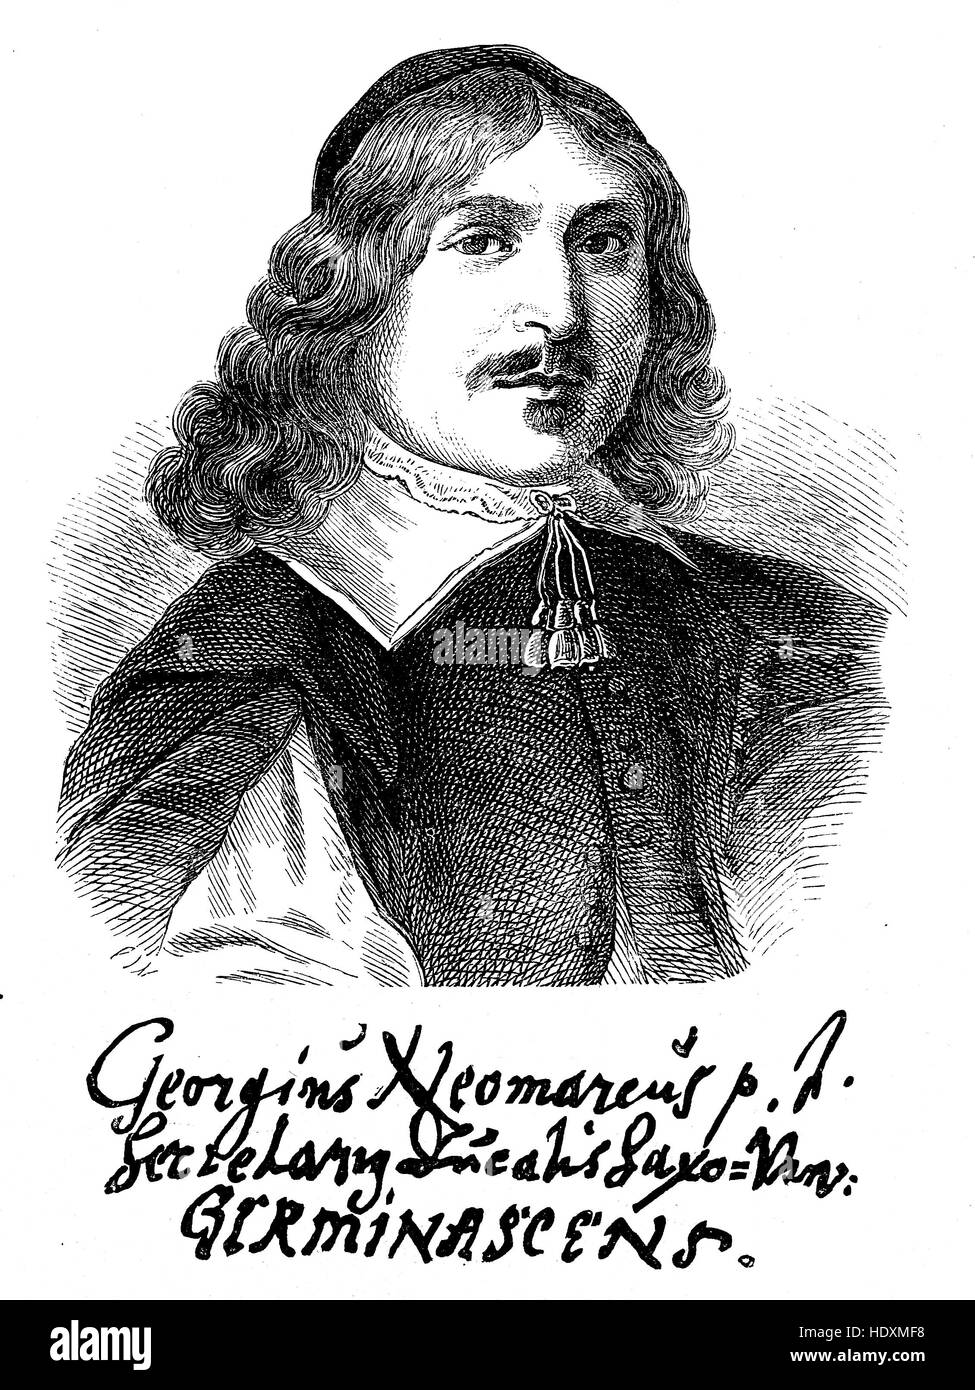 Georg Neumark, 1621-1681, was a German poet and composer of hymns, woodcut from the year 1882, digital improved Stock Photo